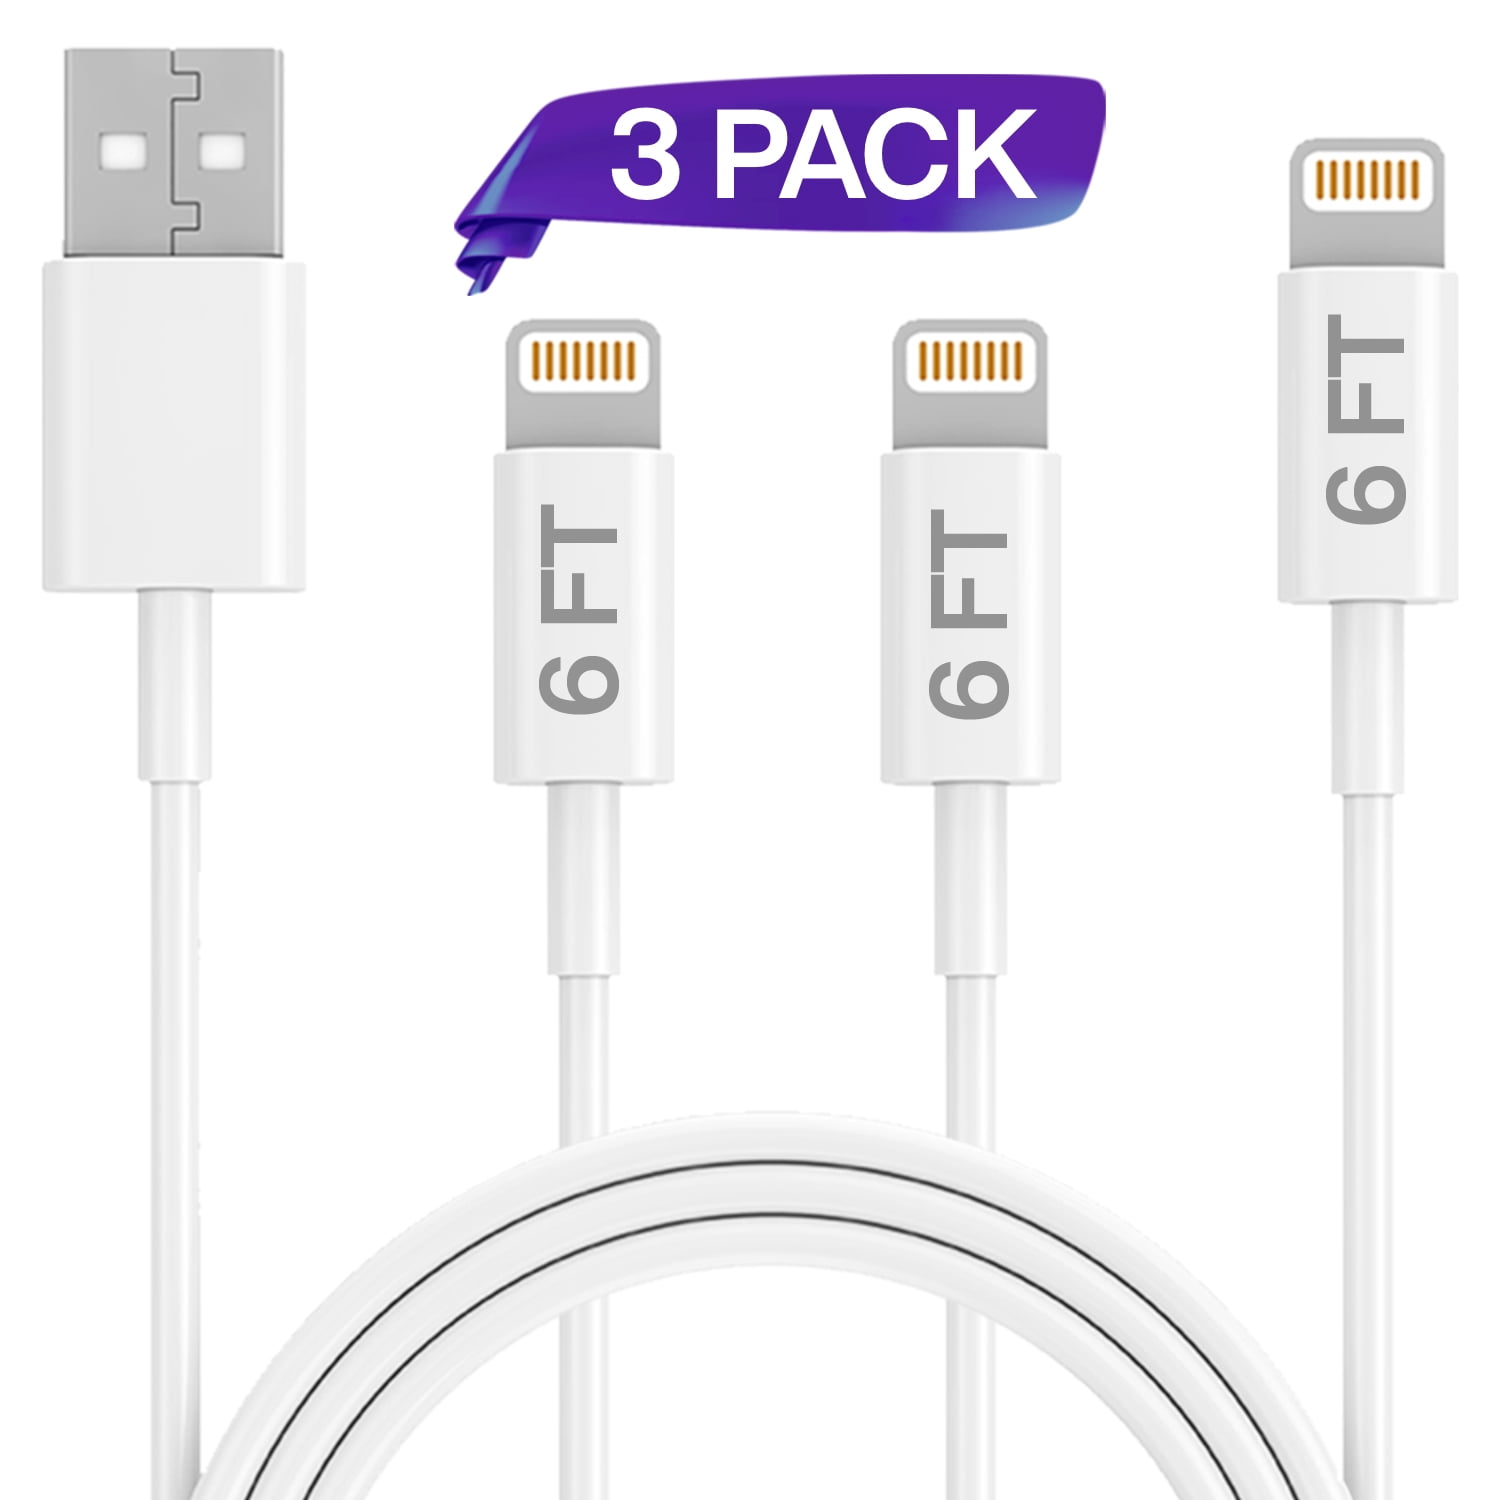 5 Pack 10 FT Lightning Charging Cables USB Data Cord High Speed Cable Compatible with iPhone 13 12 11 XS XR X Pro Max Mini 8 7 6S 6 Plus 5S SE iPad iPod AirPods Color MFi Certified iPhone Charger, 